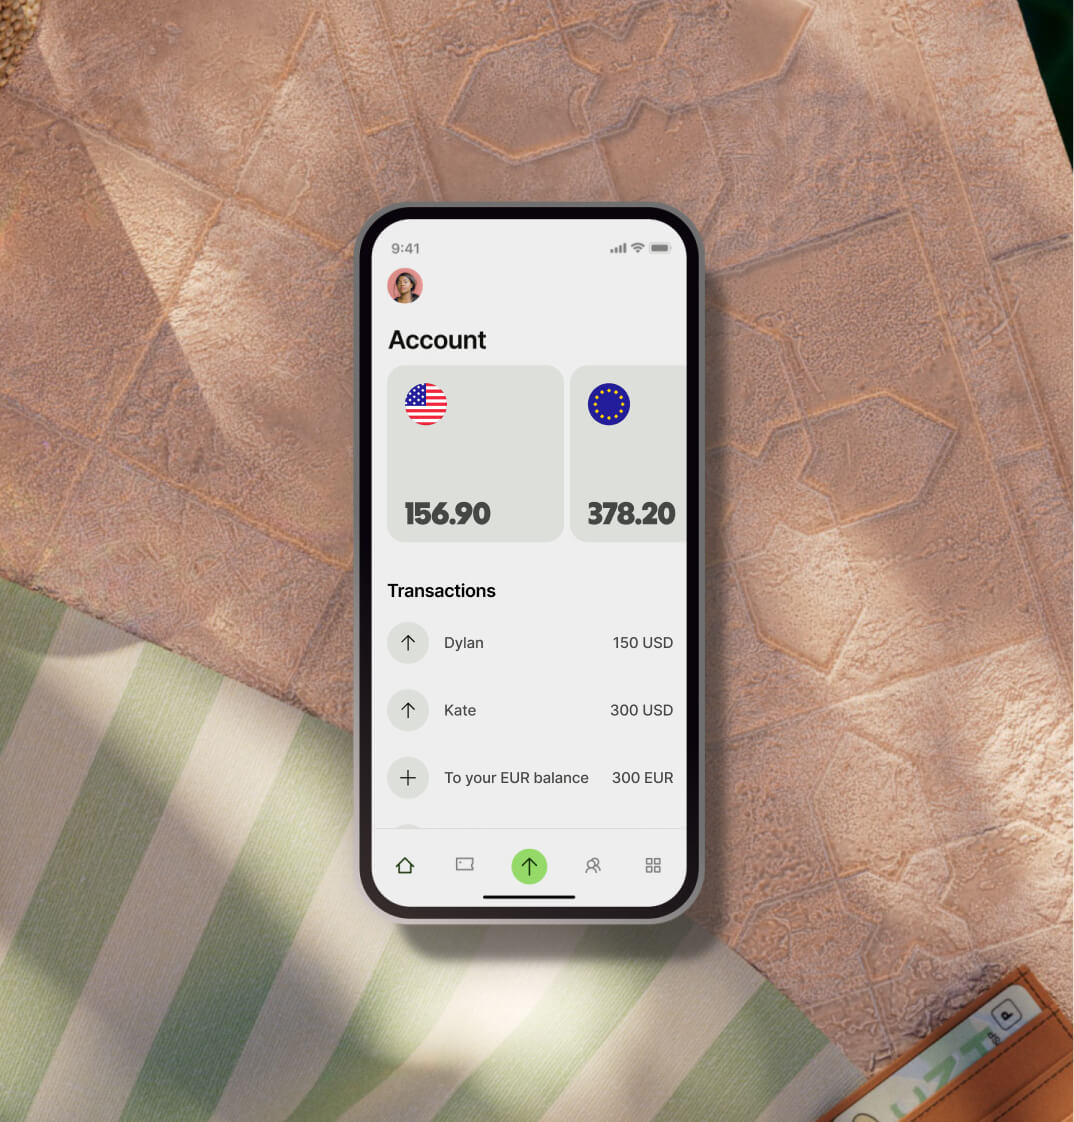 A phone displaying the Wise app sits on a table. The app shows a USD balance and EUR balance, and transactions sending money from the account.